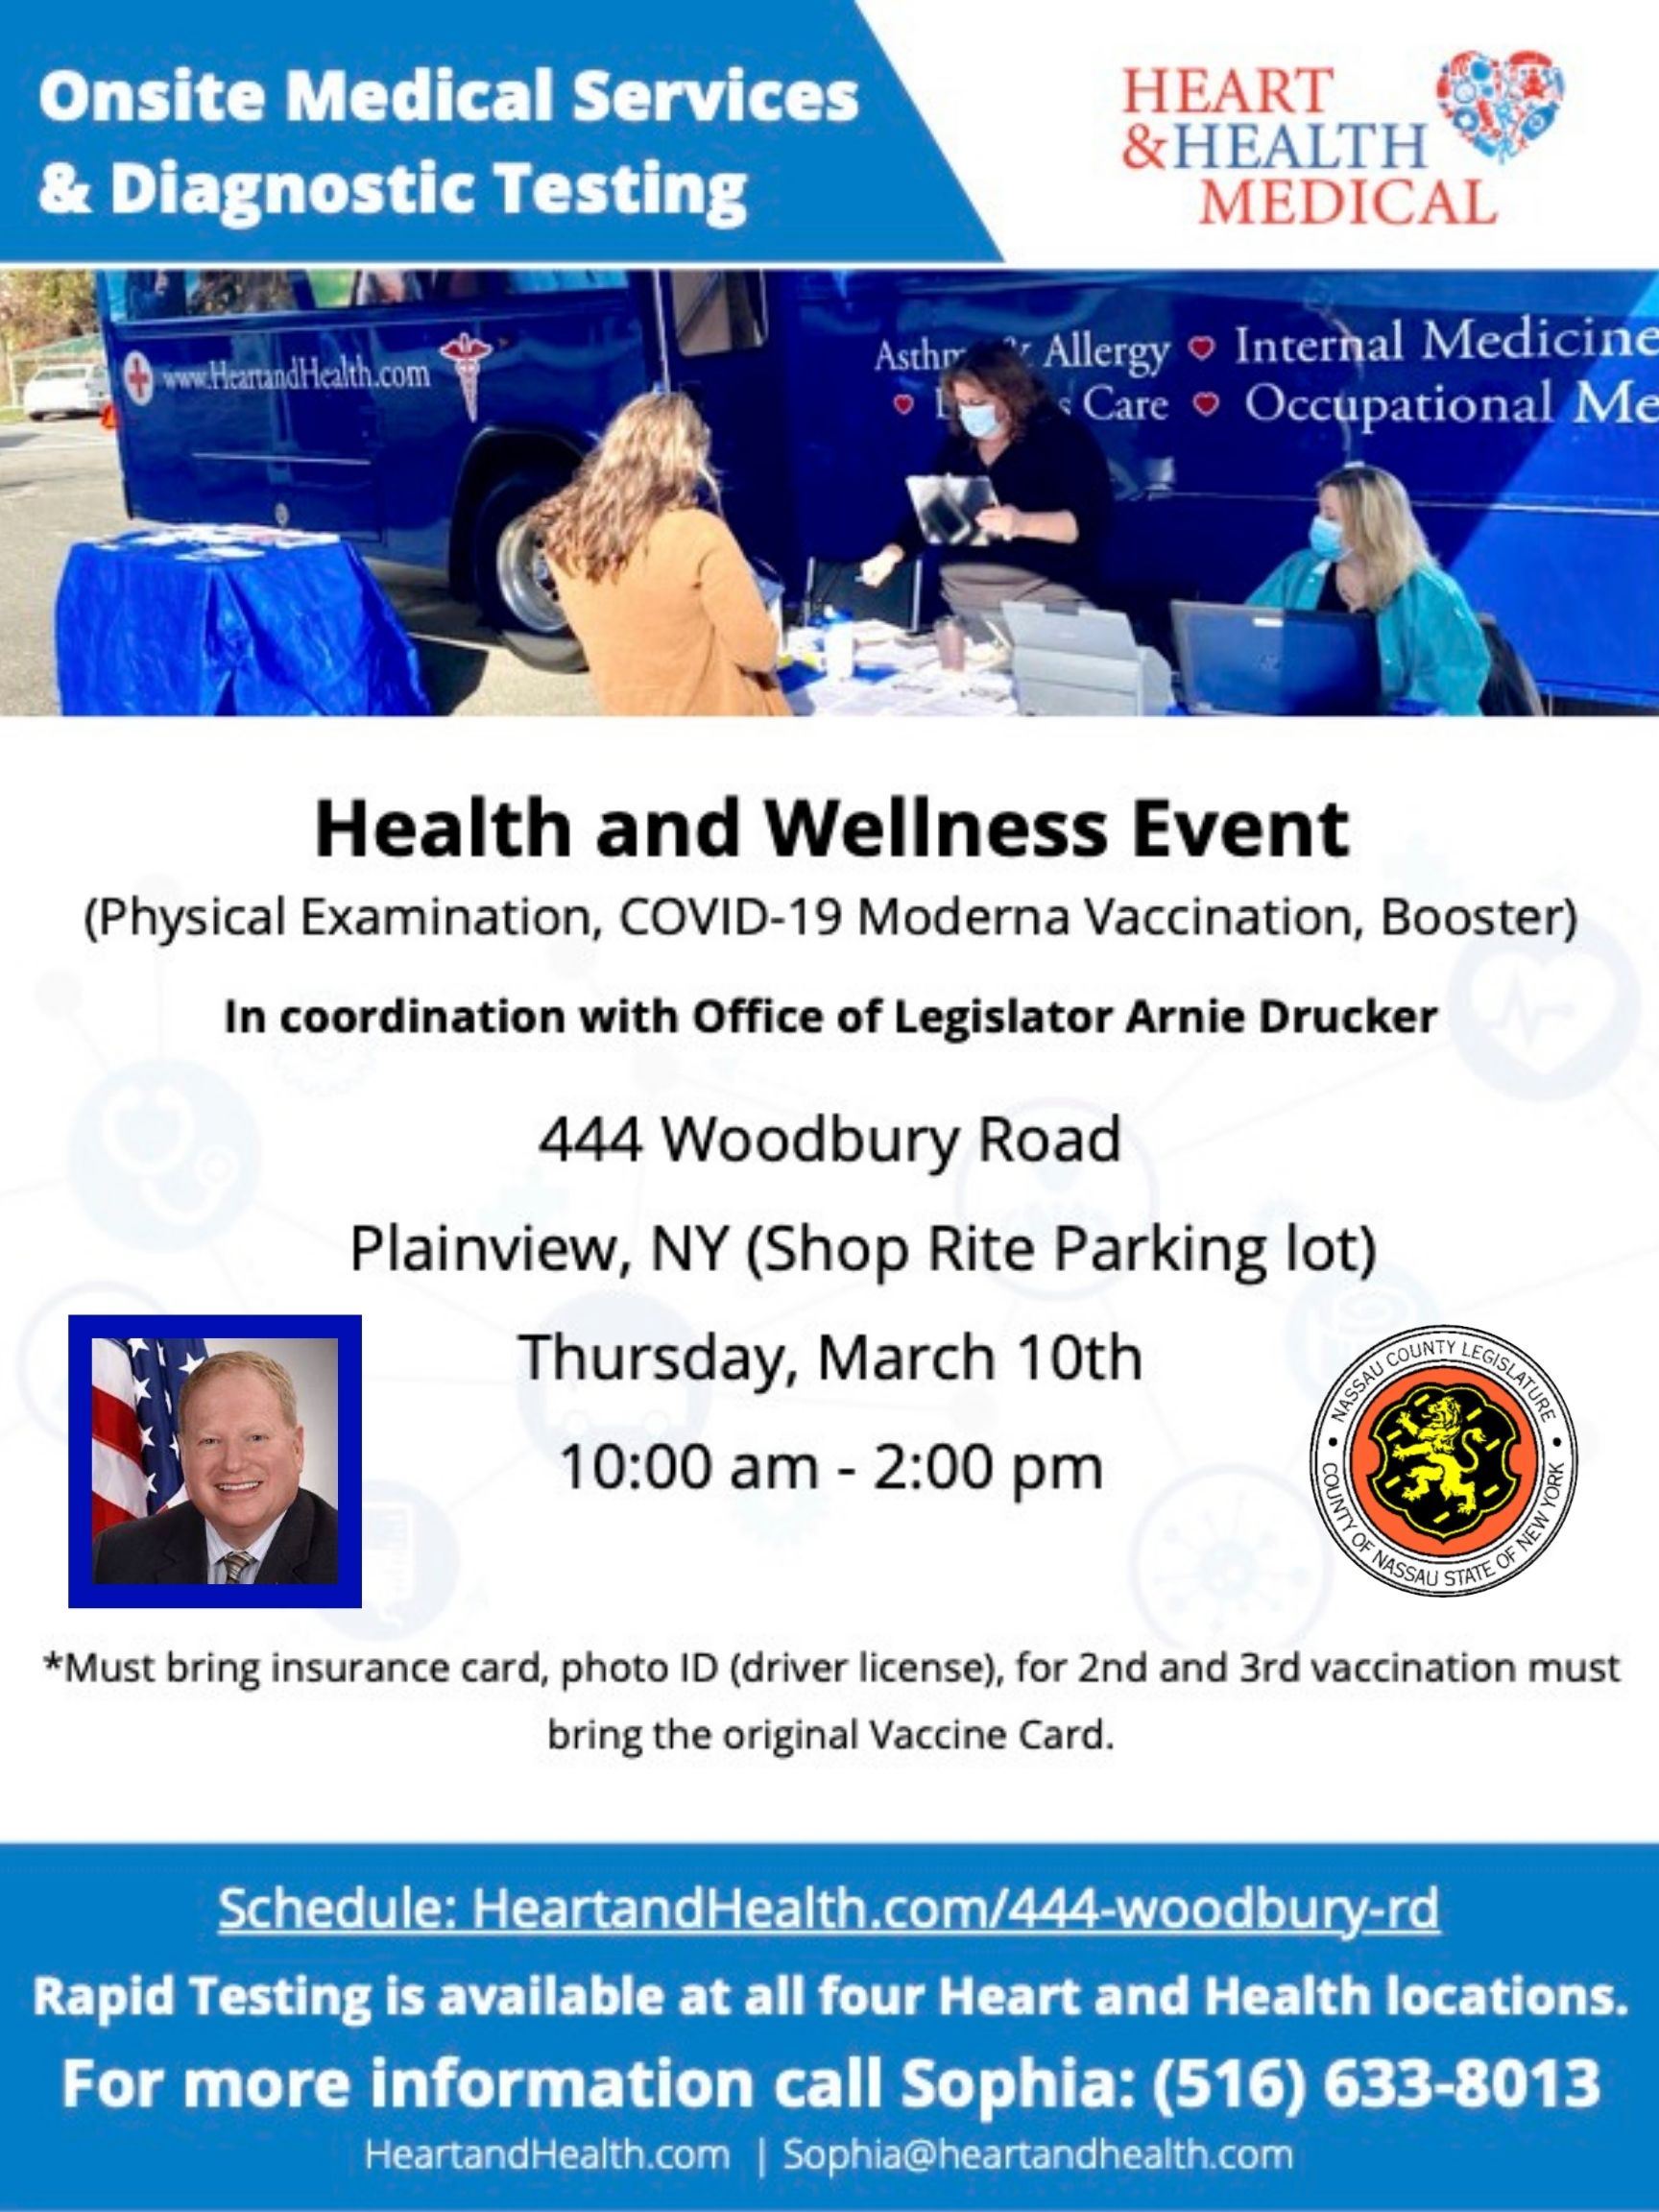 Legislator Arnold Drucker Partners with Heart and Health Medical to Host Mobile COVID-19 Vaccination